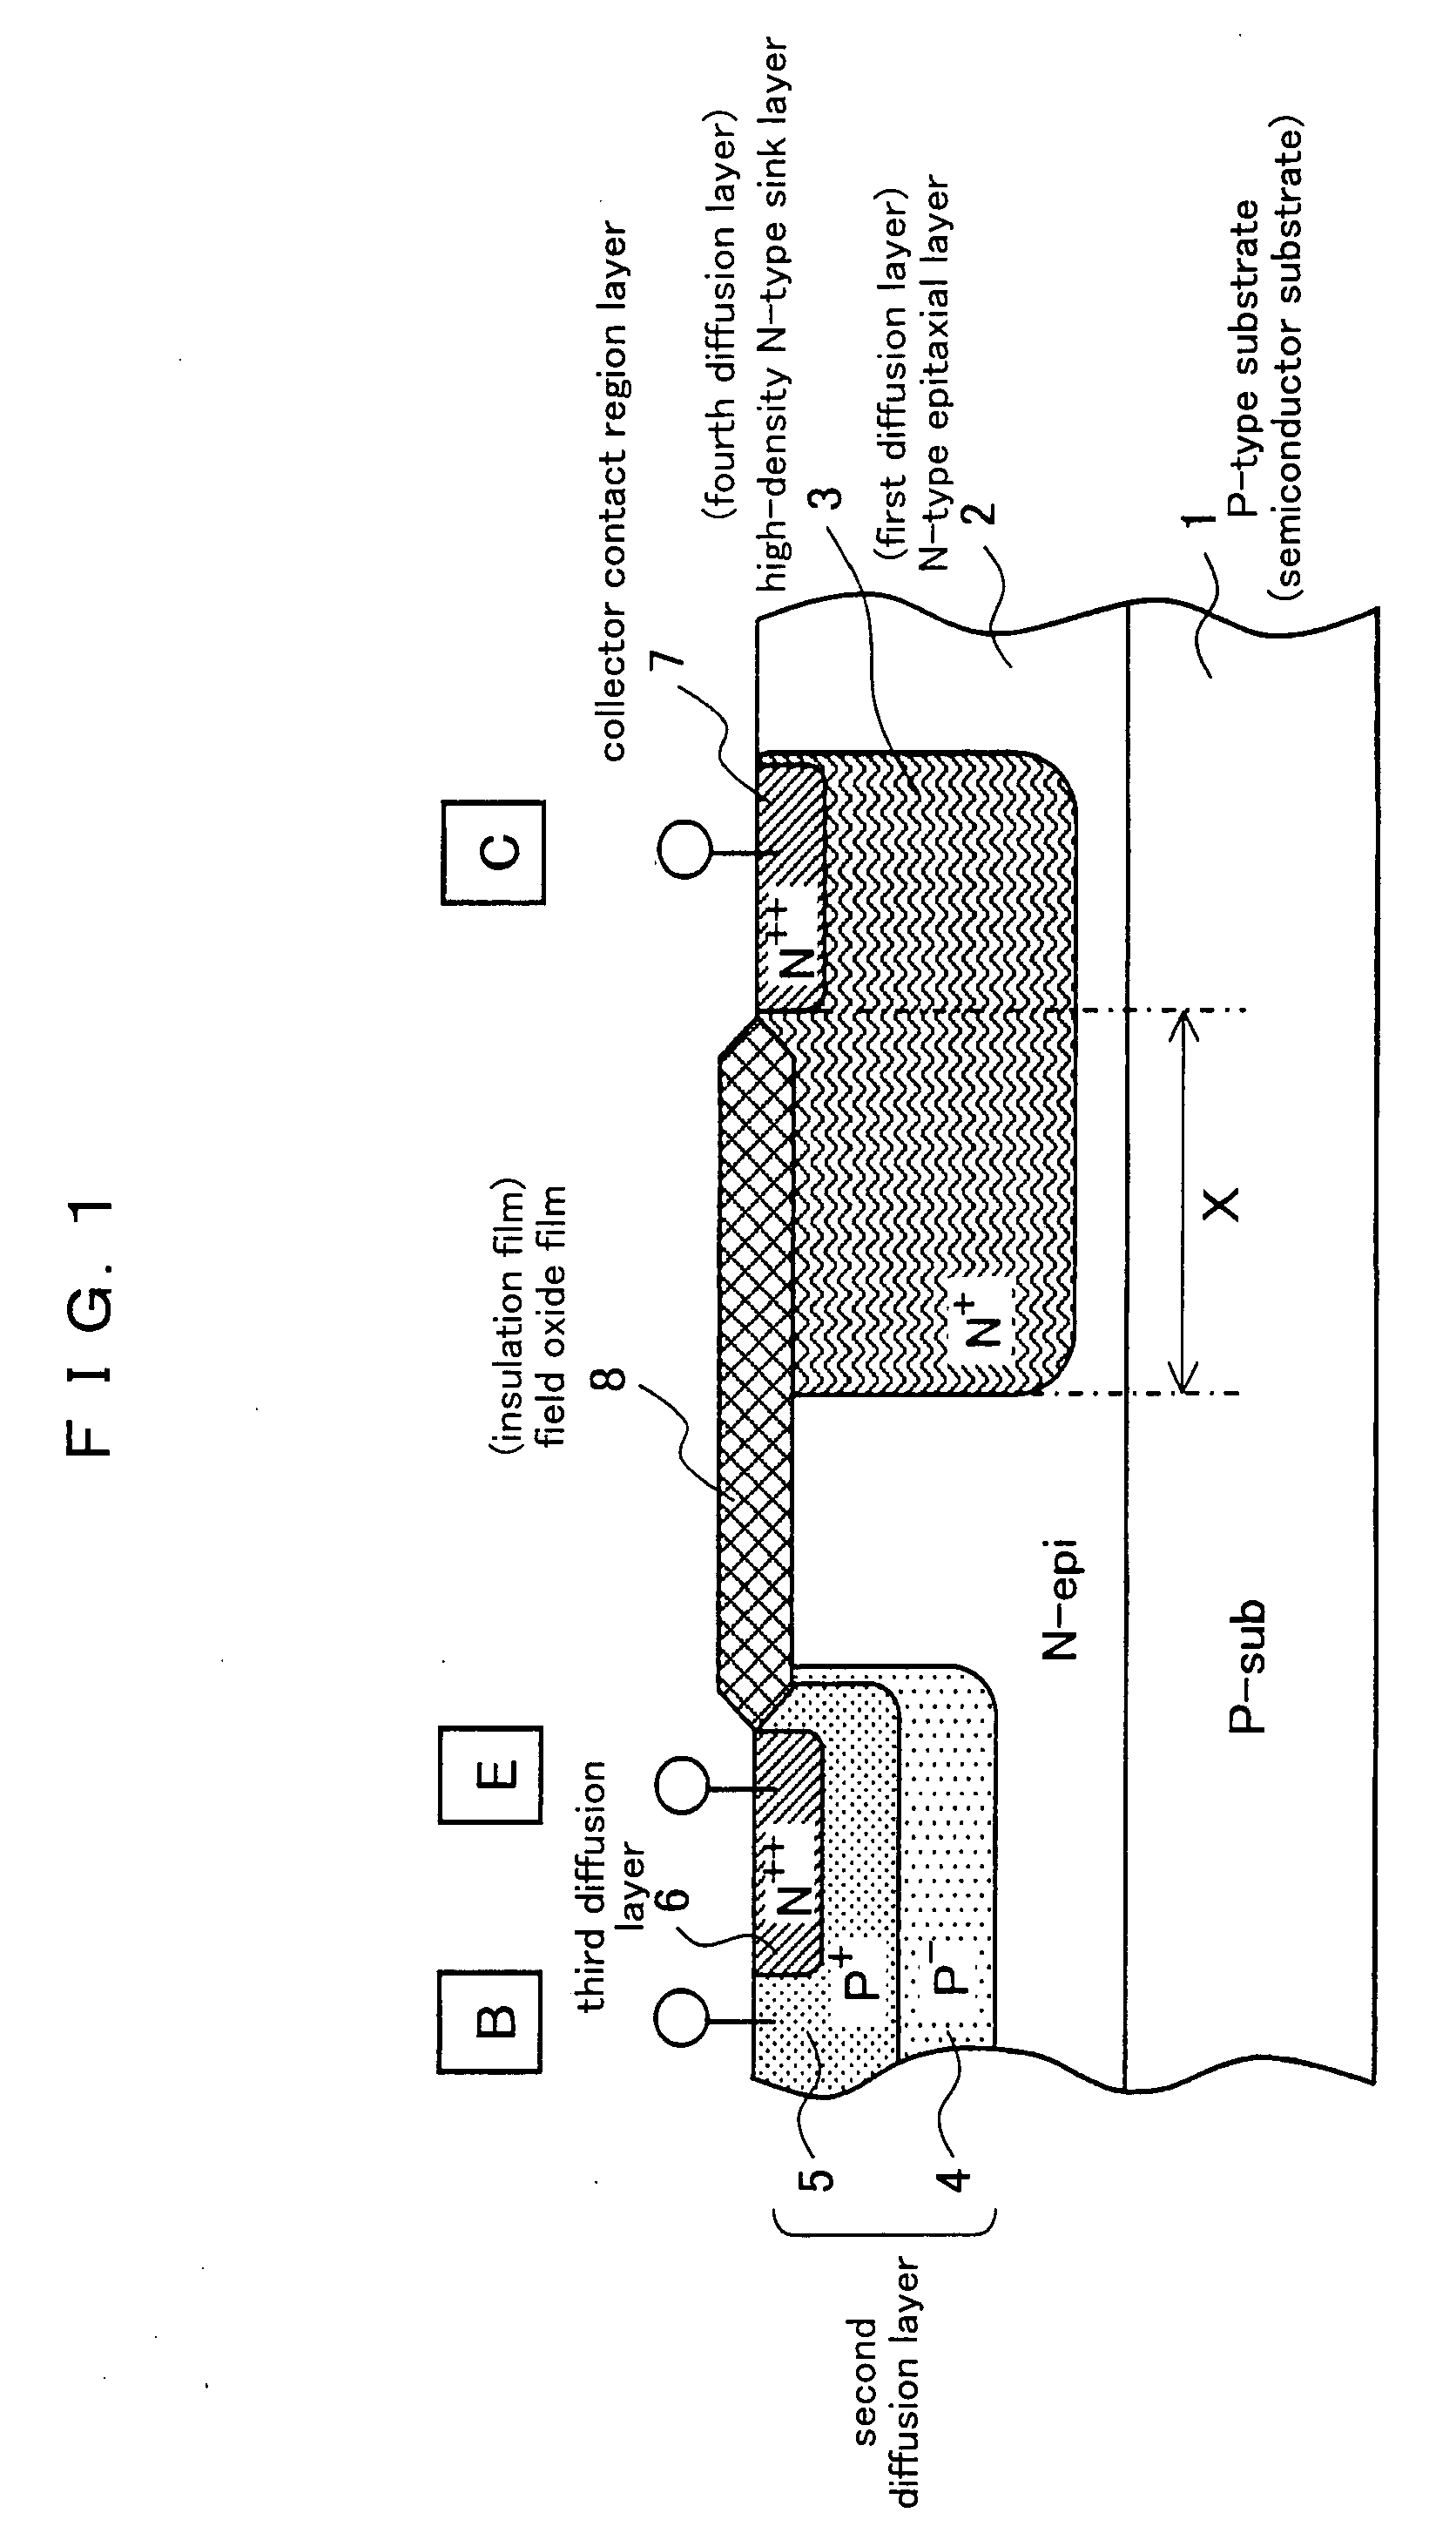 Electrostatic discharge protection device in integrated circuit